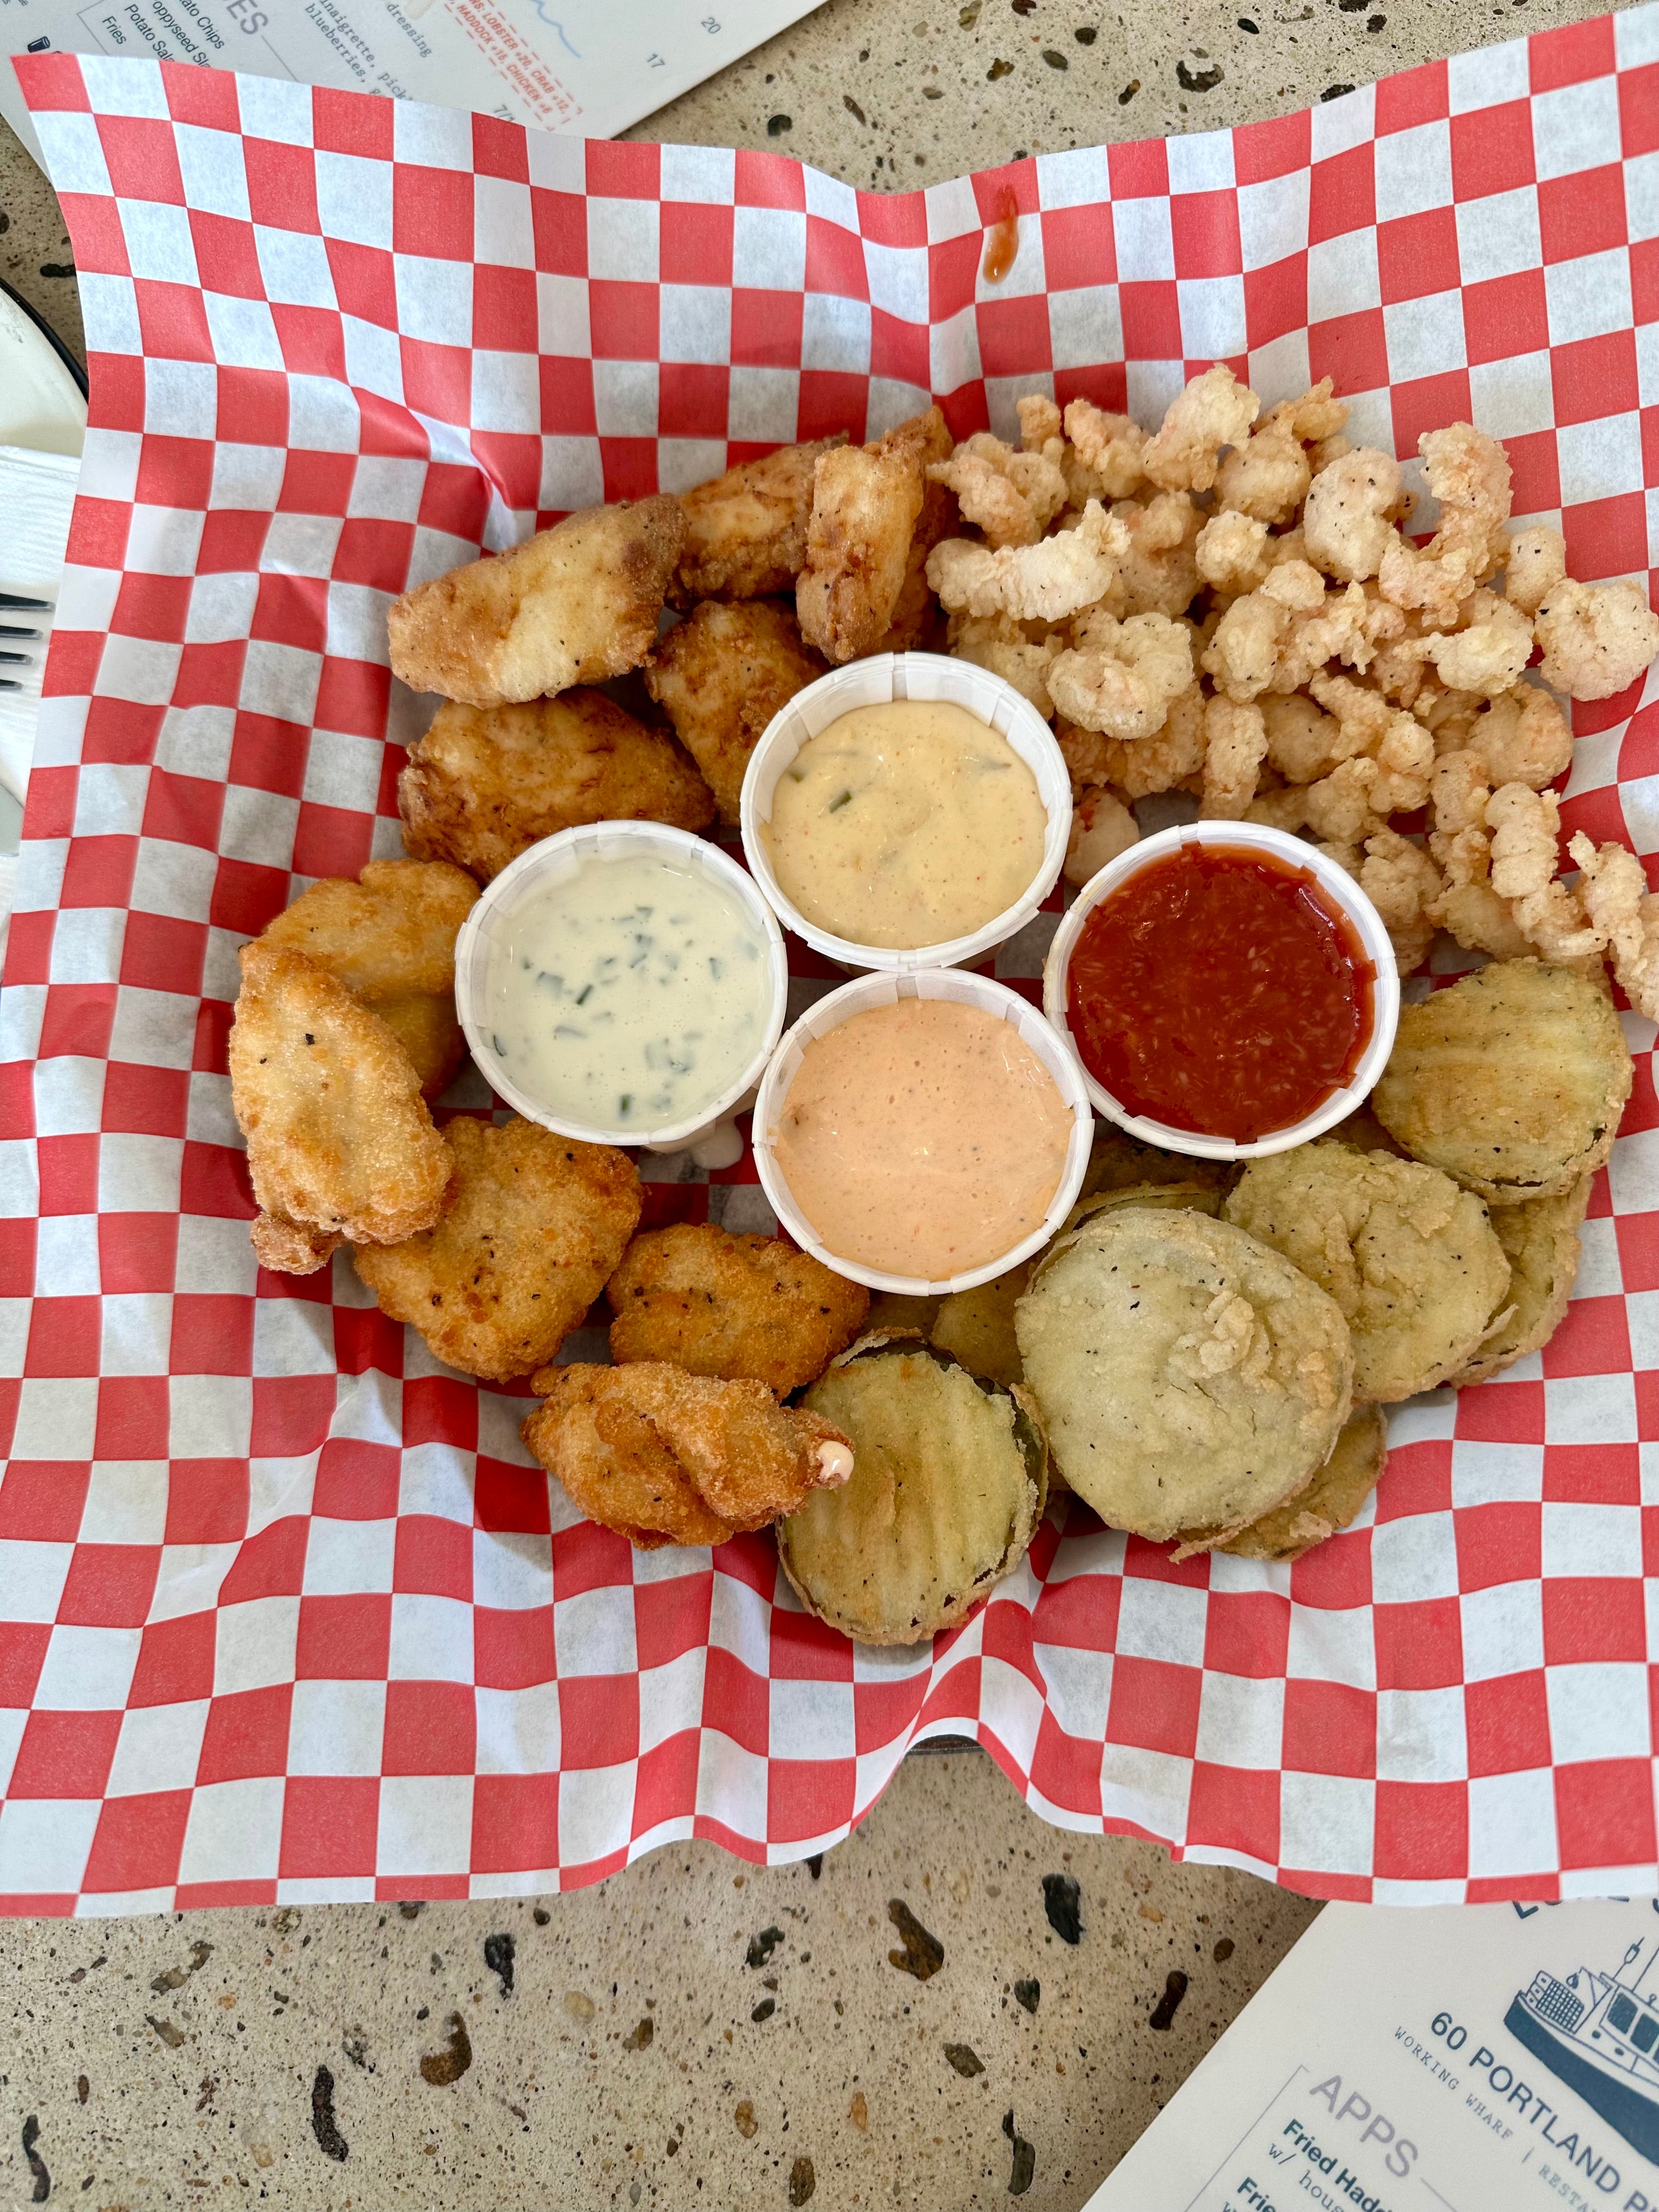 haddock bites, fried shrimp, popcorn chicken, fried pickles and various sauces in a basket lined with wax paper